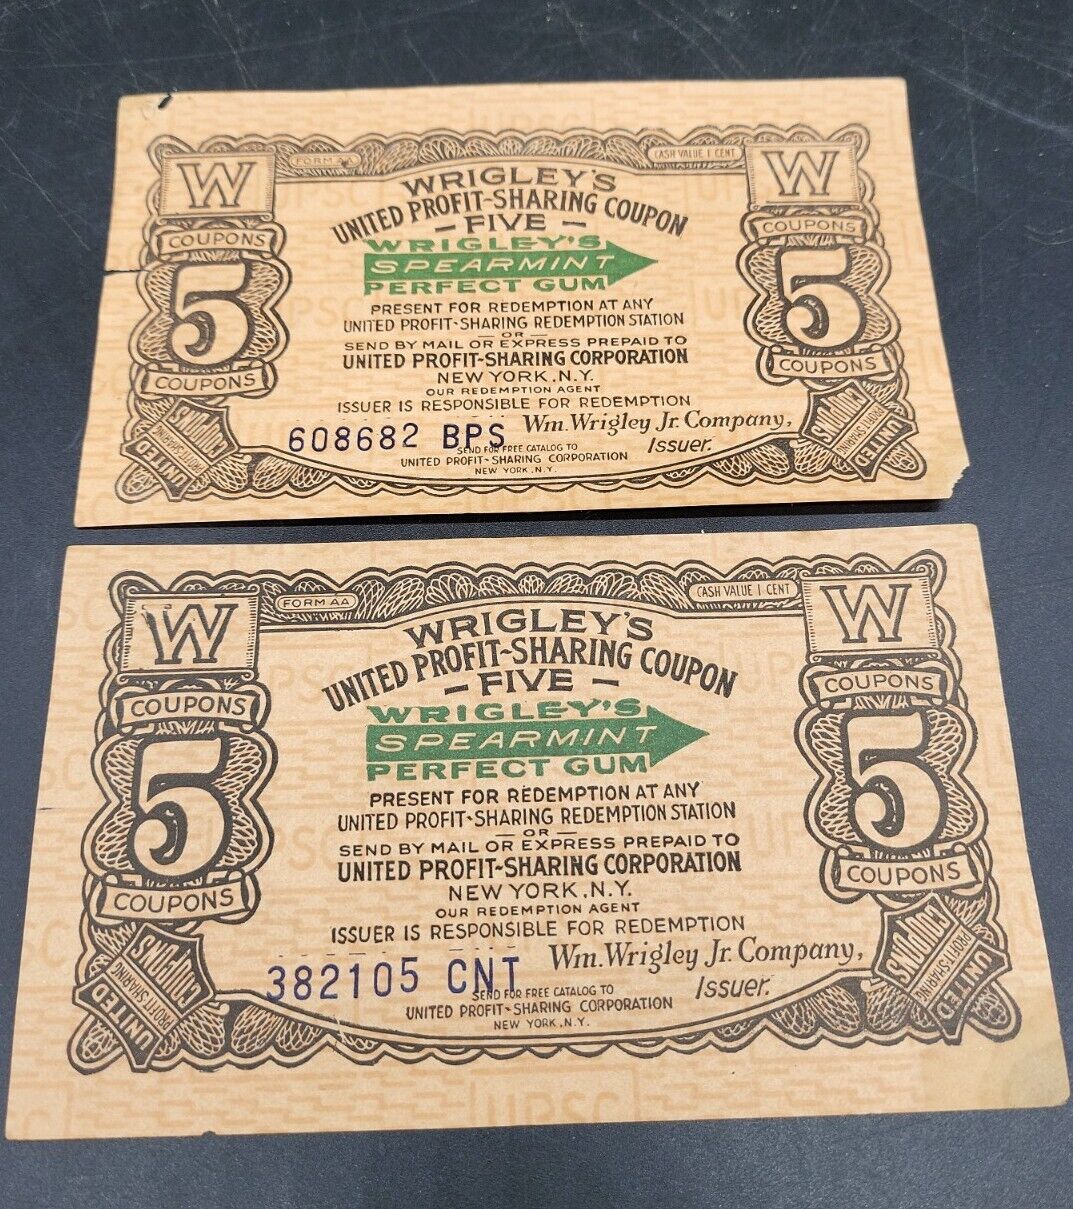 Vintage Wrigley's Spearmint Gum United Profit Sharing Coupon Lot of 2